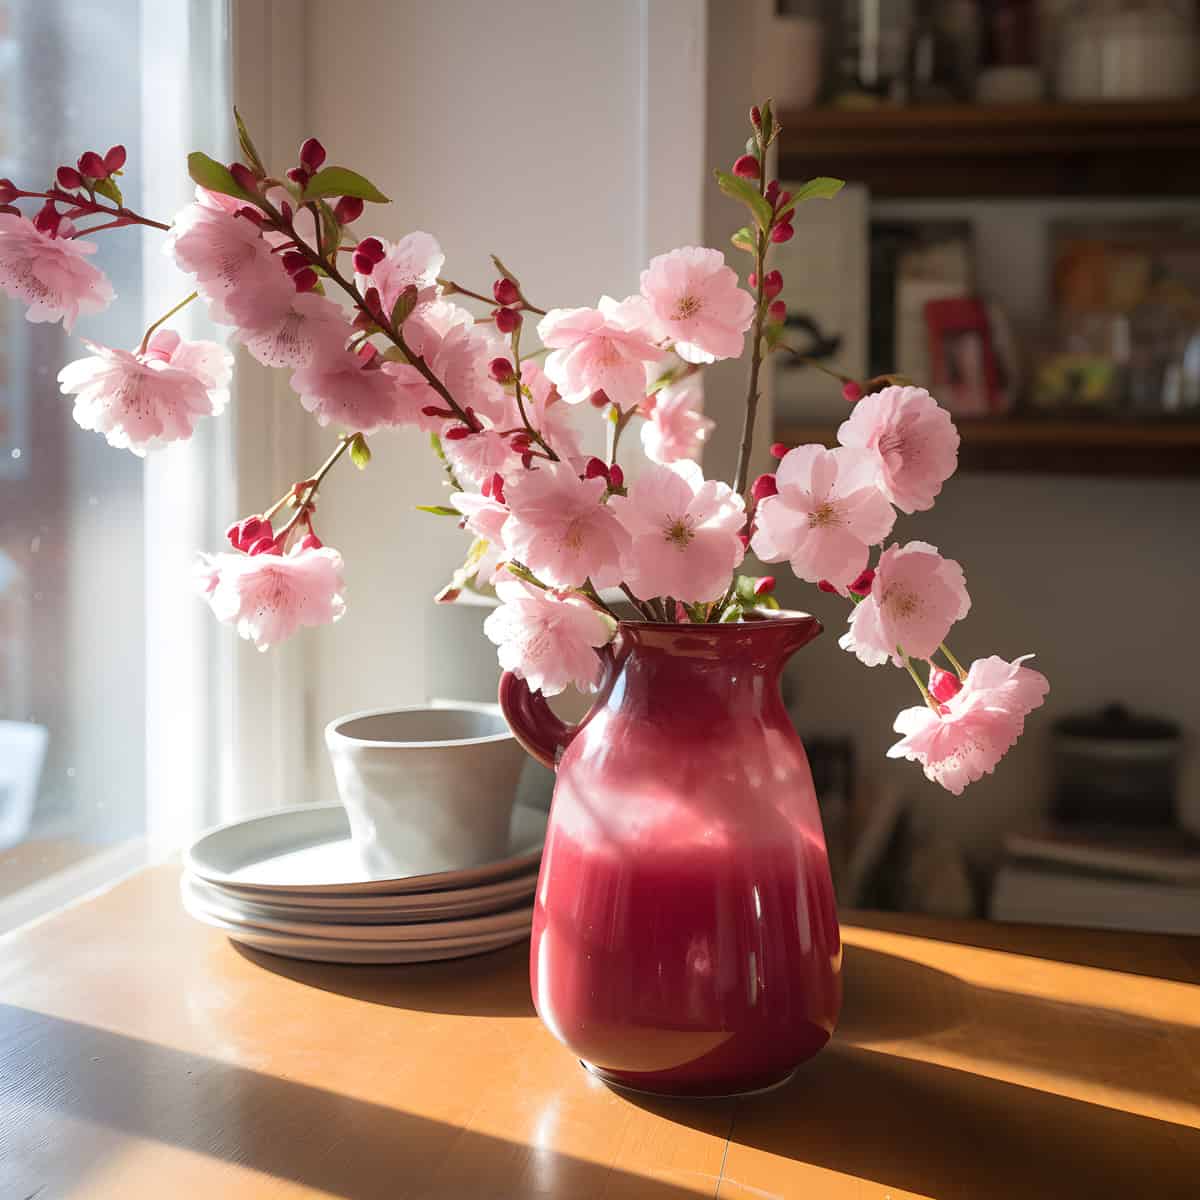 Japanese Cherries on a kitchen counter